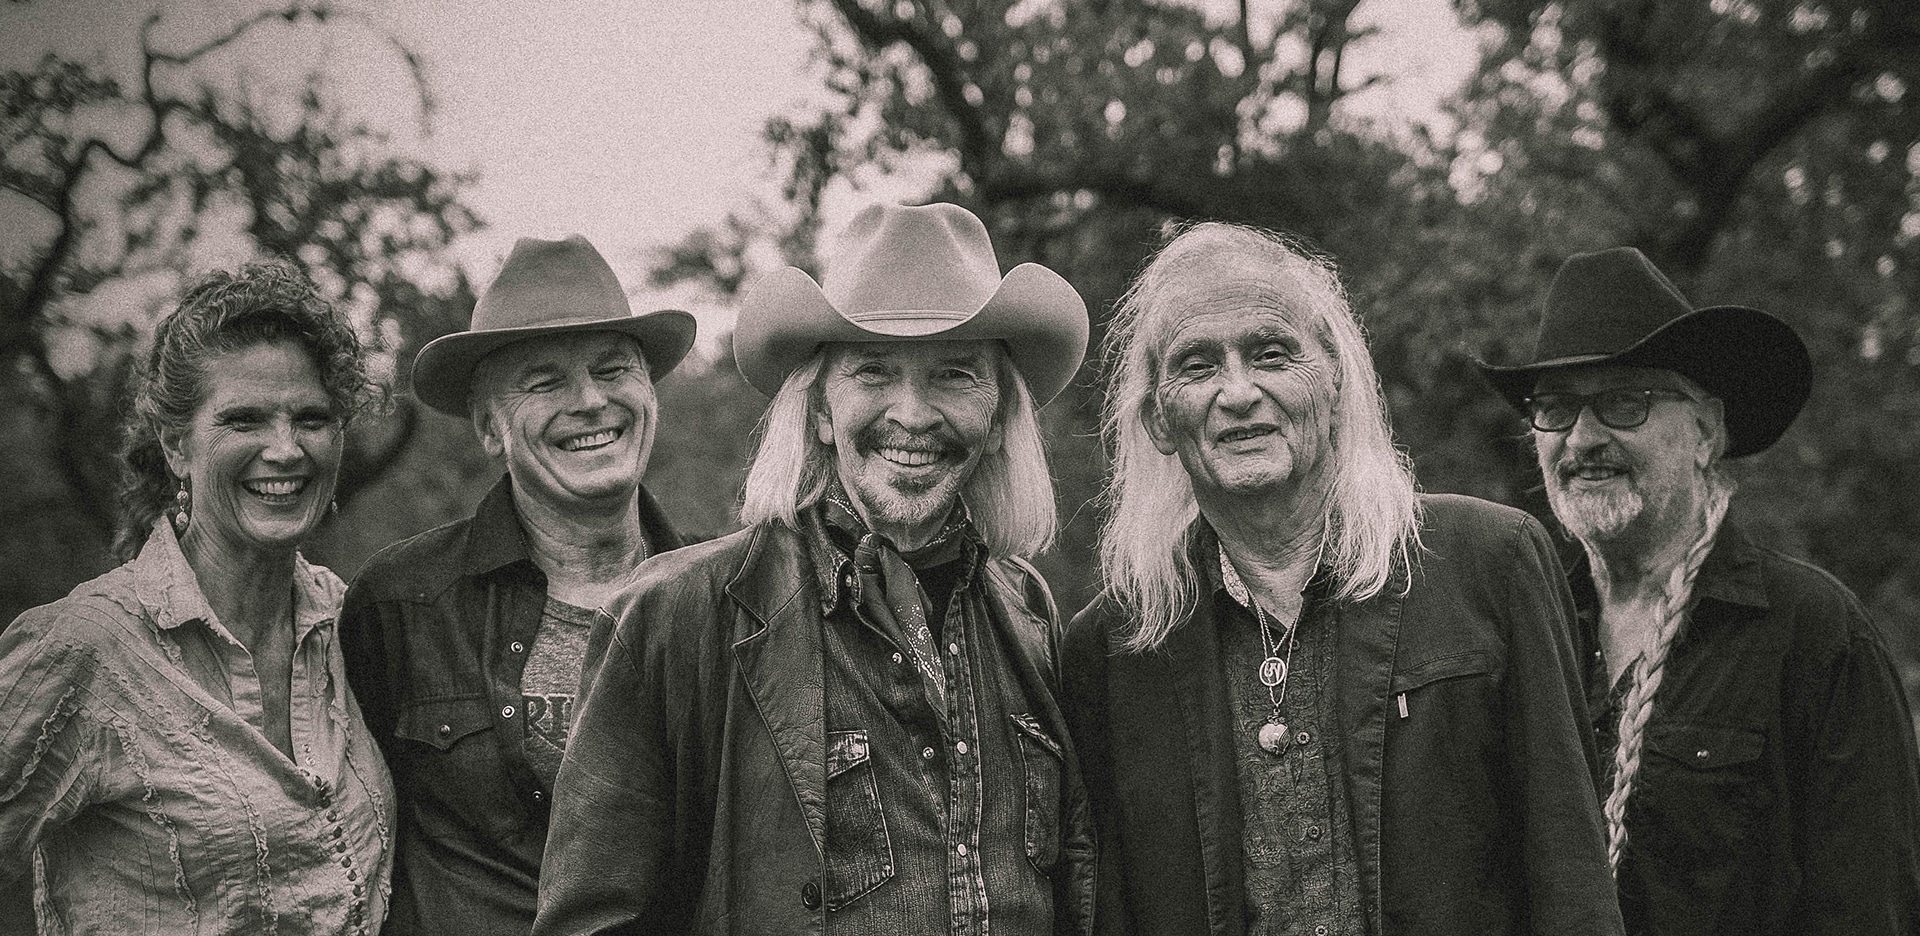 Dave Alvin and Jimmie Dale Gilmore with the Guilty Ones